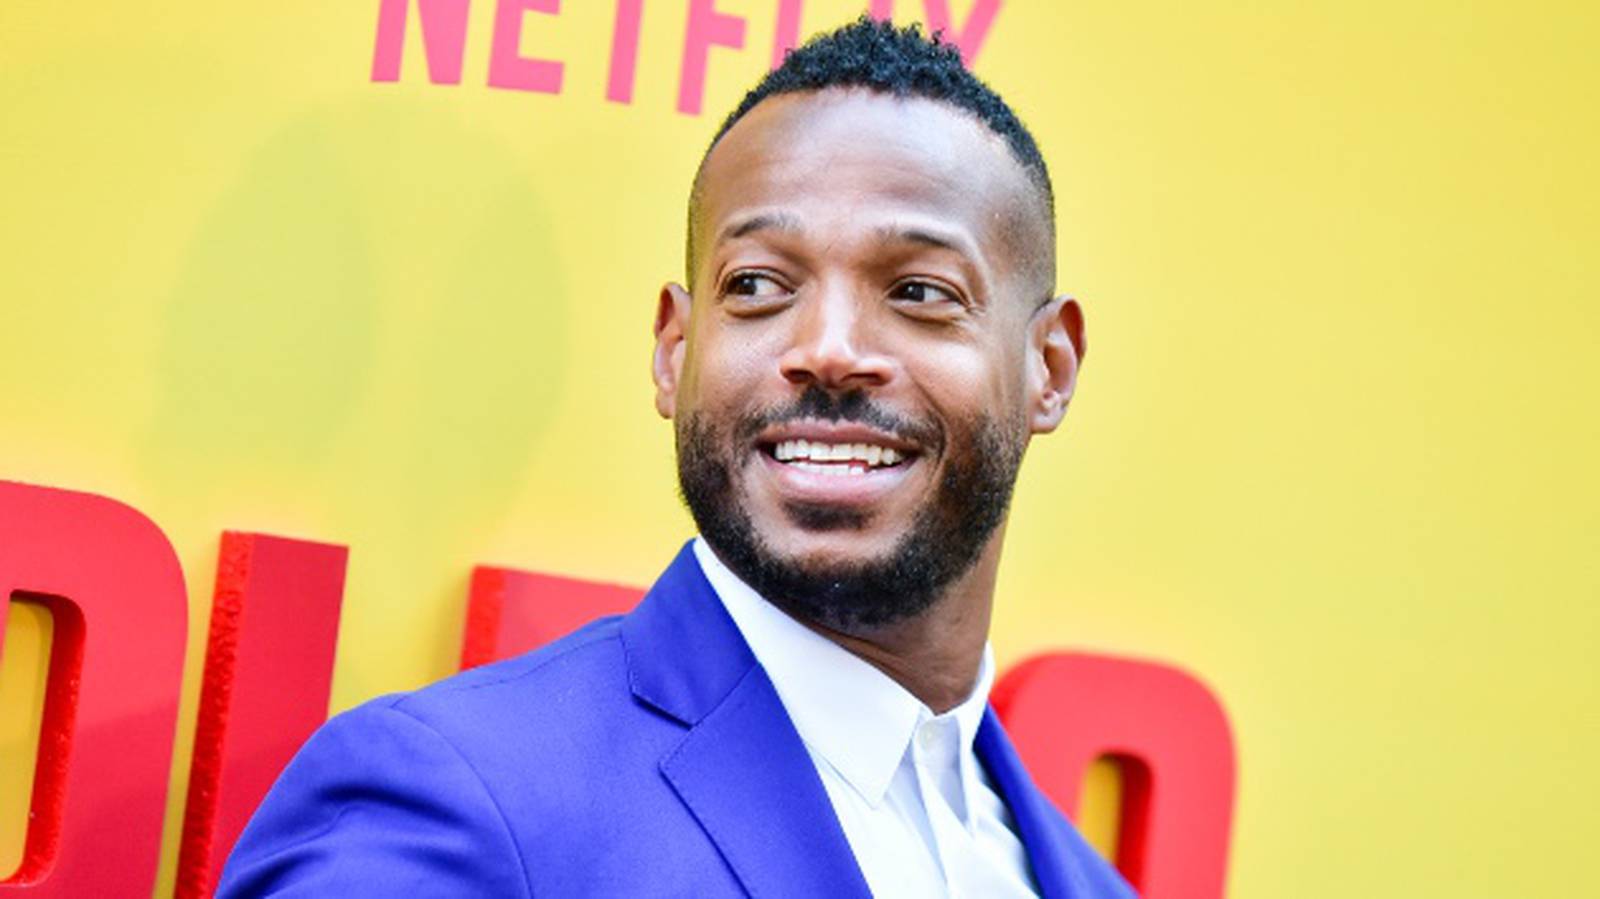 Marlon Wayans' new comedy special to air on HBO Max; 'Good Times, The